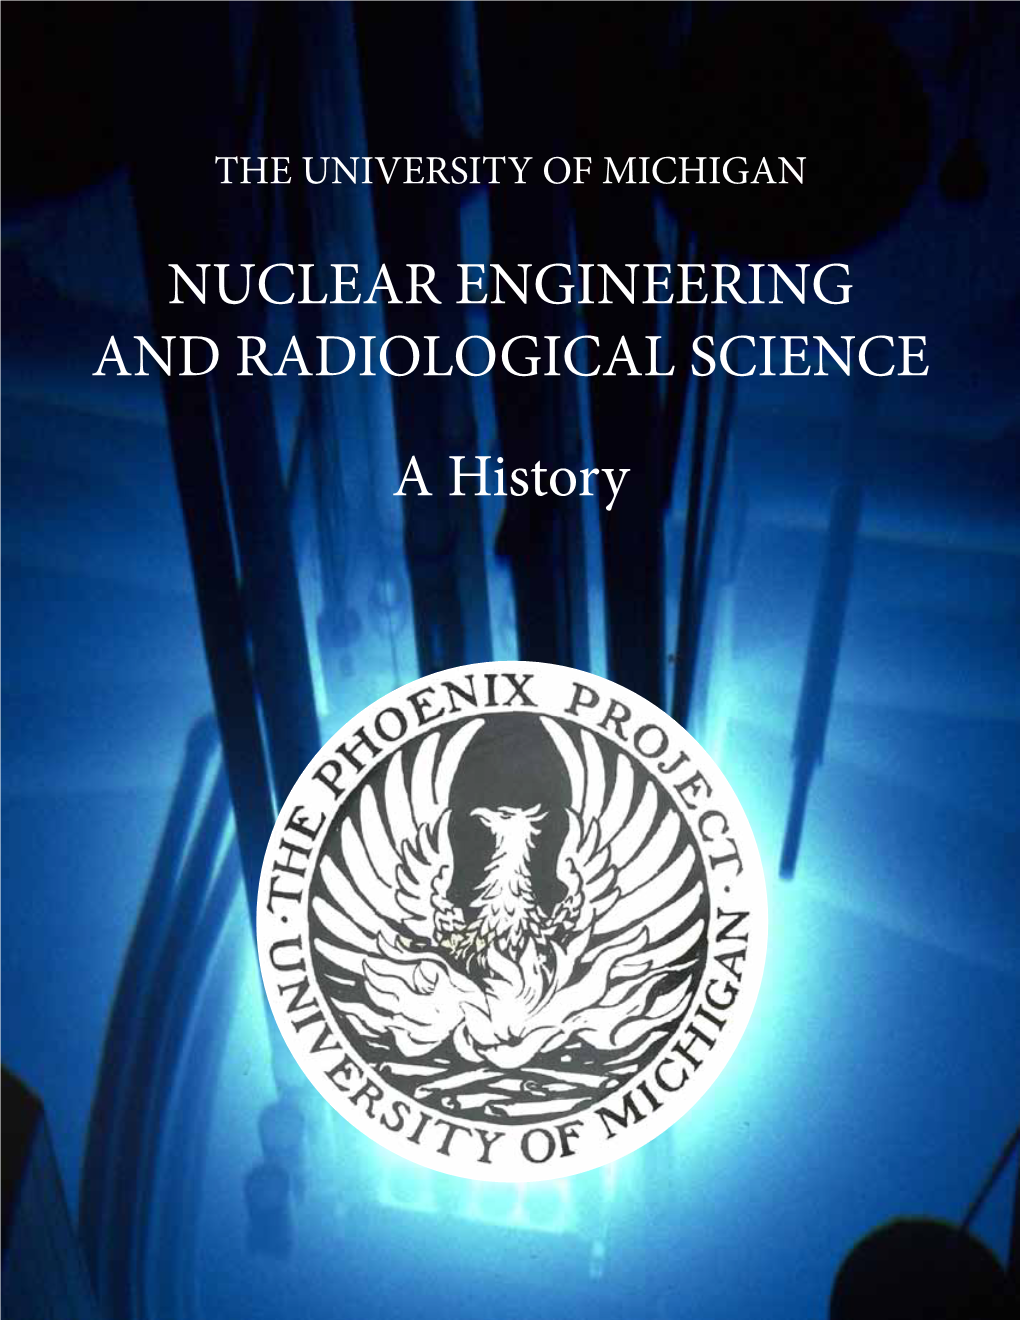 NUCLEAR ENGINEERING and RADIOLOGICAL SCIENCE a History